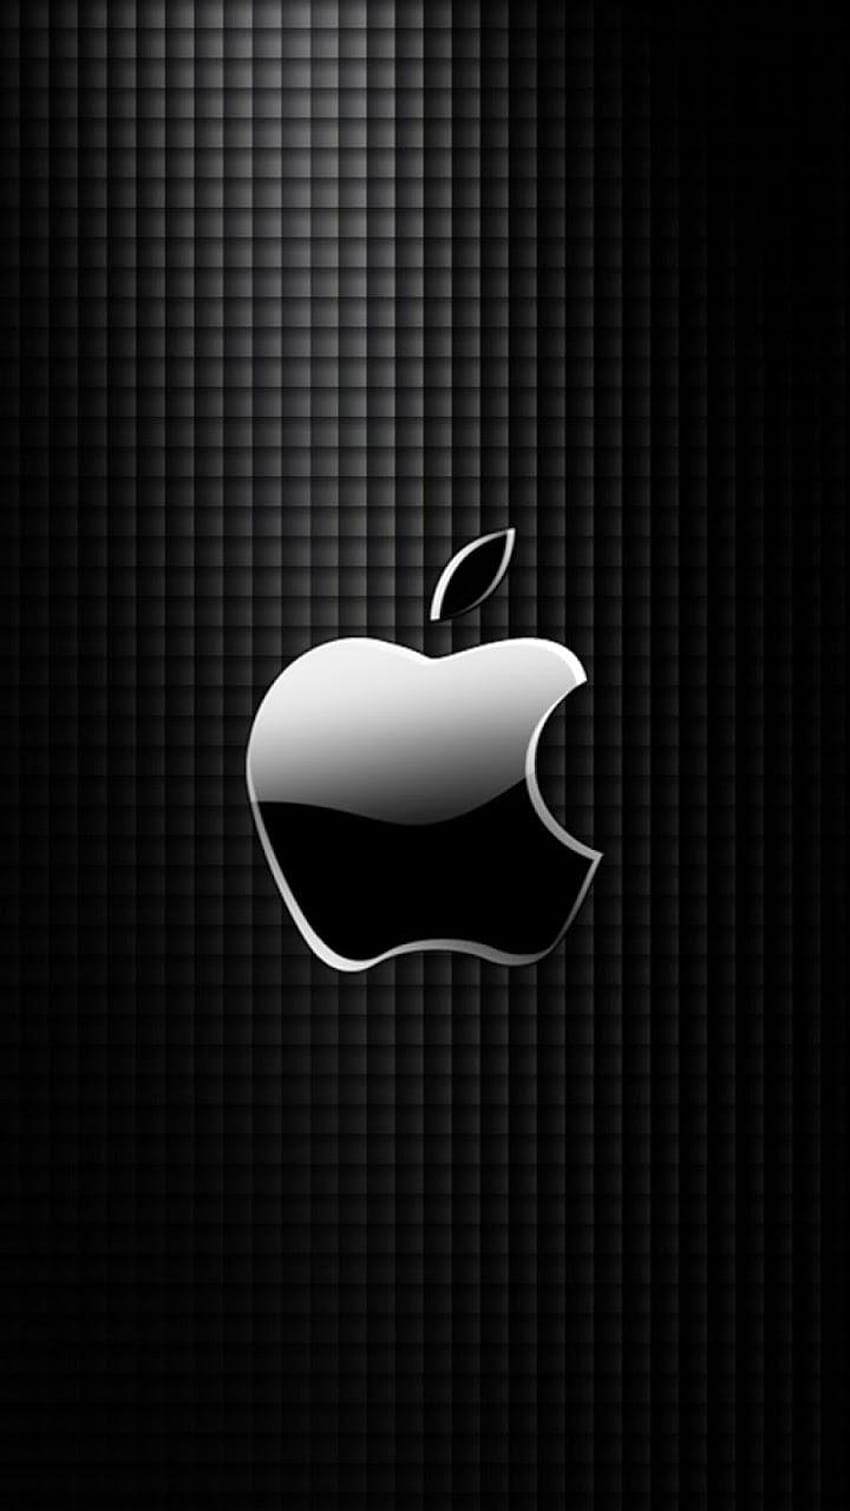 Android Best : Sleek Apple Logo with Black Grid, apple logo android HD phone wallpaper